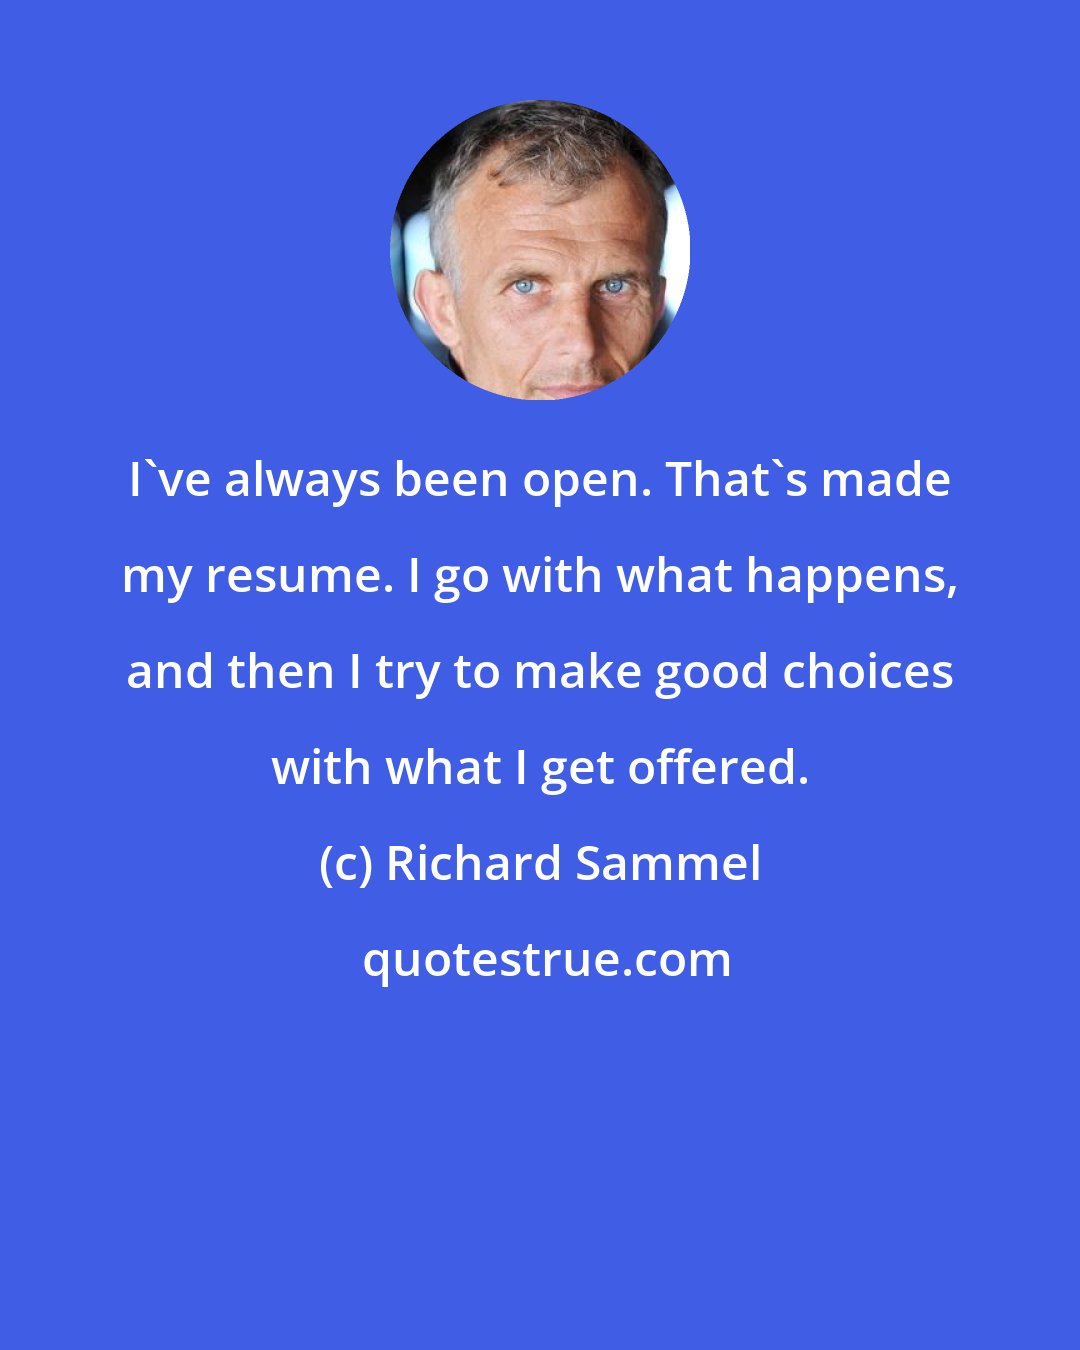 Richard Sammel: I've always been open. That's made my resume. I go with what happens, and then I try to make good choices with what I get offered.